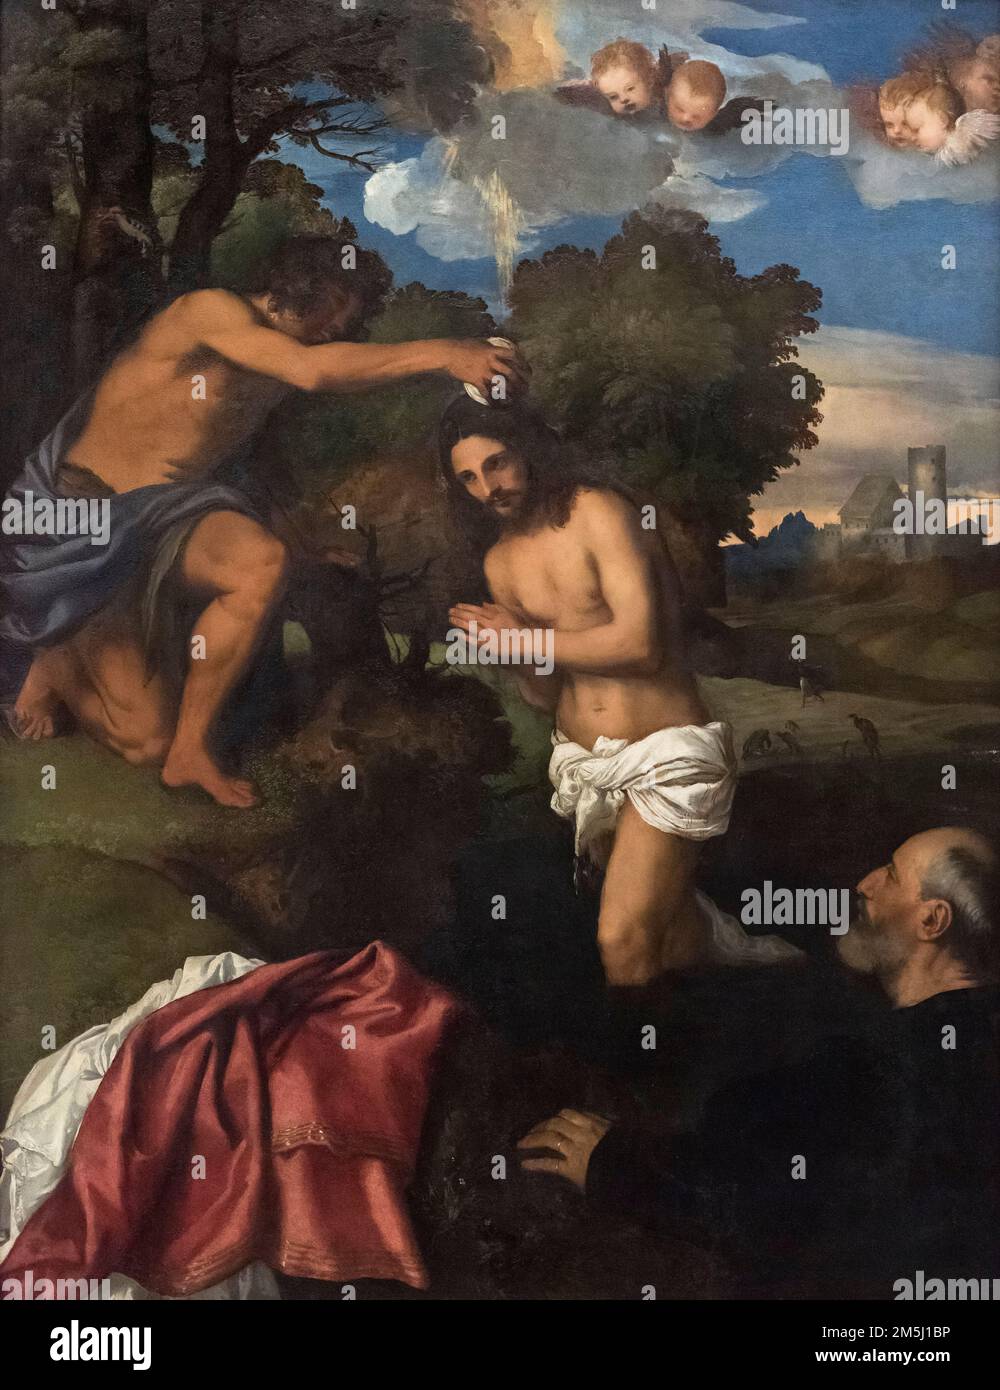 Titian - Tiziano Vecellio (ca.1488-1576), Baptism of Christ, 1511-12. Capitoline Museums, Rome, Italy.  Oil on wood panel.  Inventory: PC 41 Stock Photo